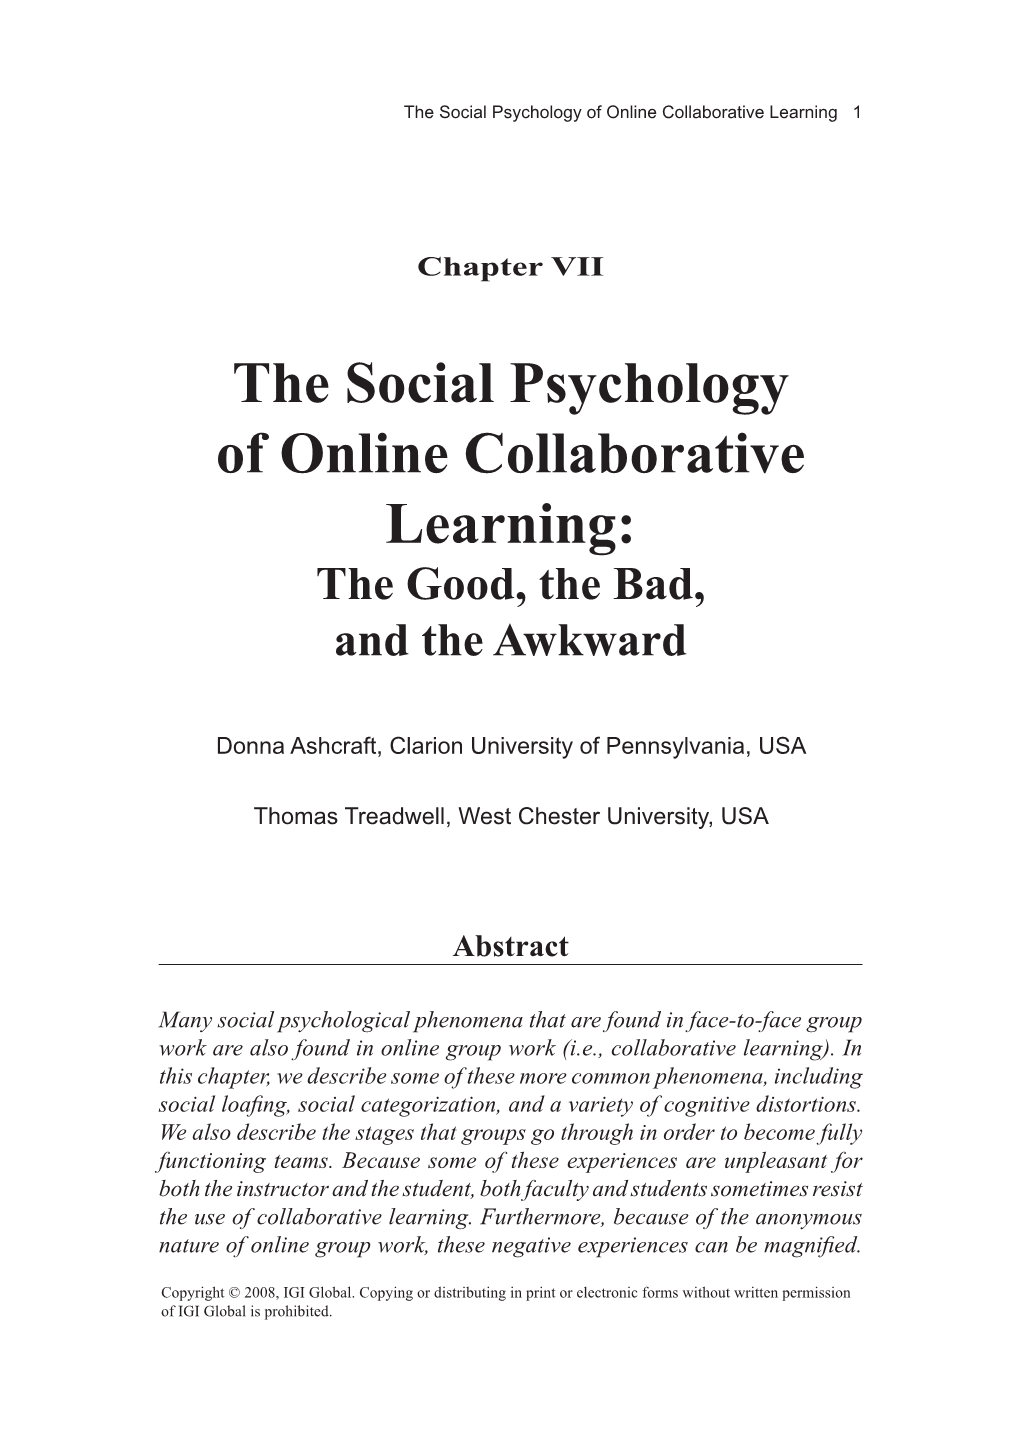 The Social Psychology of Online Collaborative Learning: the Good, the Bad, and the Awkward